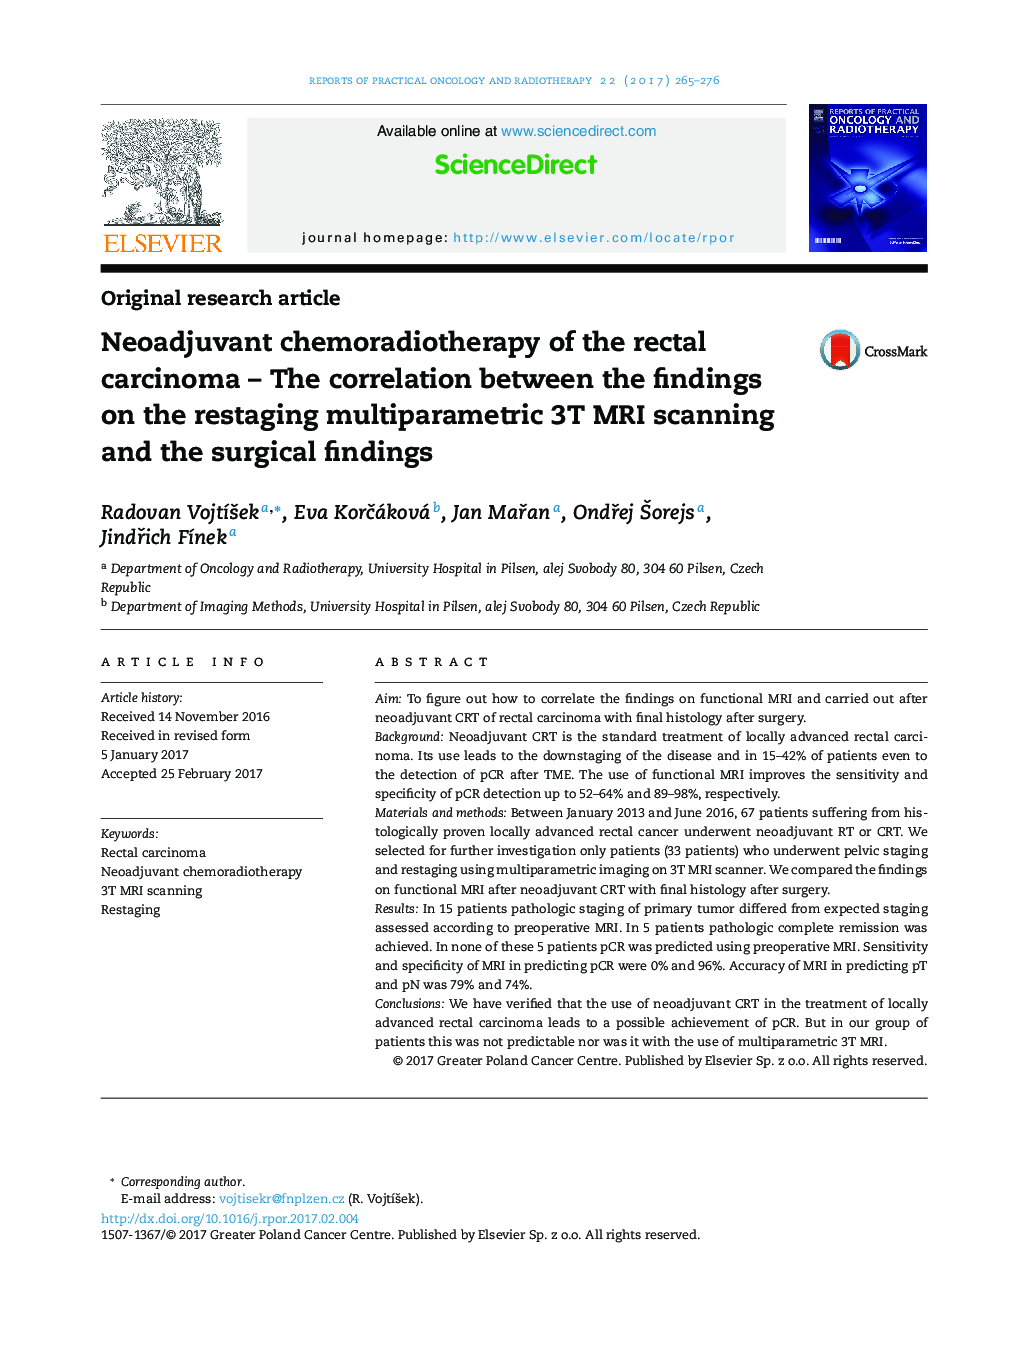 Neoadjuvant chemoradiotherapy of the rectal carcinoma - The correlation between the findings on the restaging multiparametric 3T MRI scanning and the surgical findings